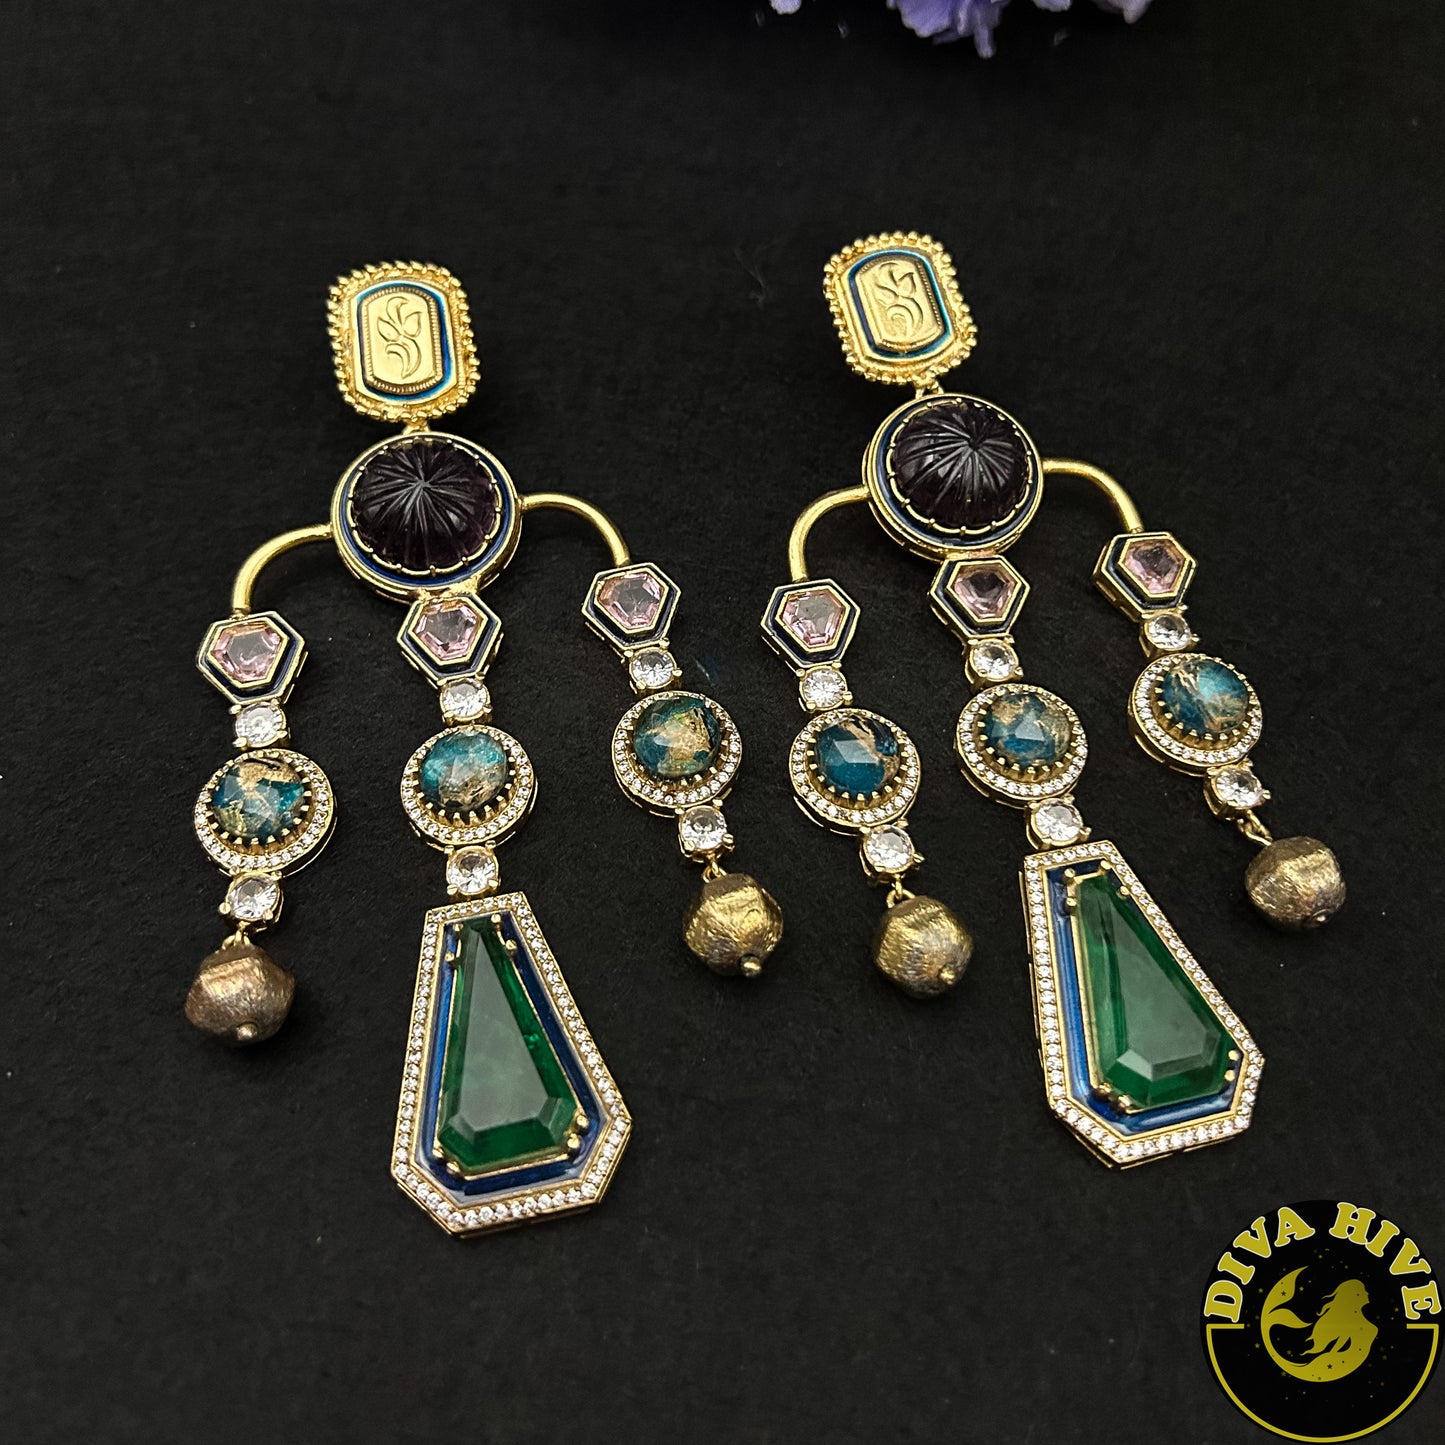 Aarzoo Fusion Earring | Sabyasachi Inspired Earring - Earring -Diva Exclusive, Doublet, Earring, featured, Fusion - Divahive